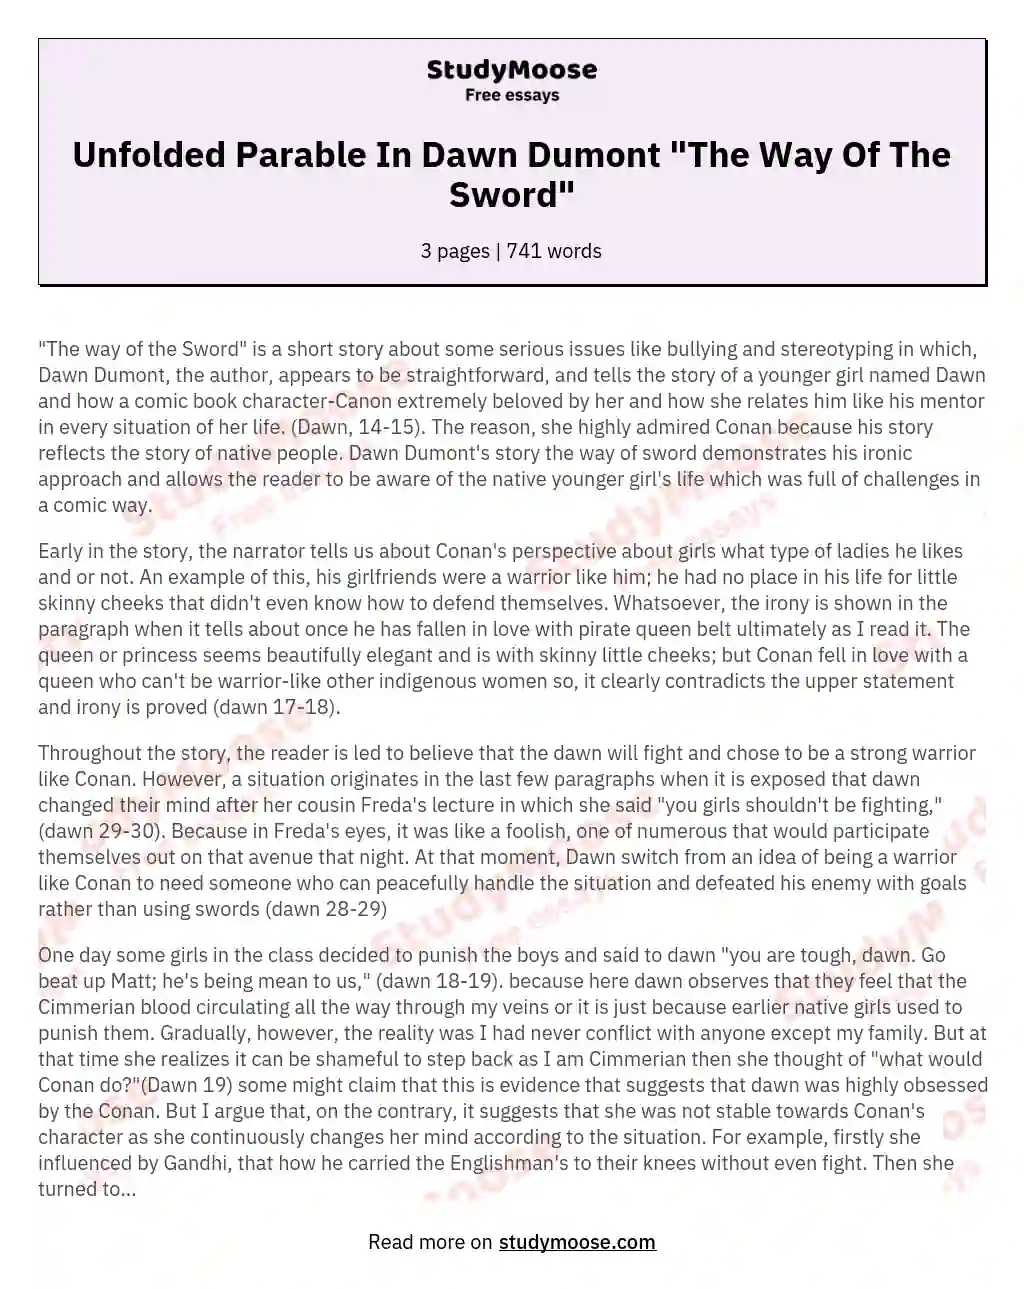 Unfolded Parable In Dawn Dumont "The Way Of The Sword"